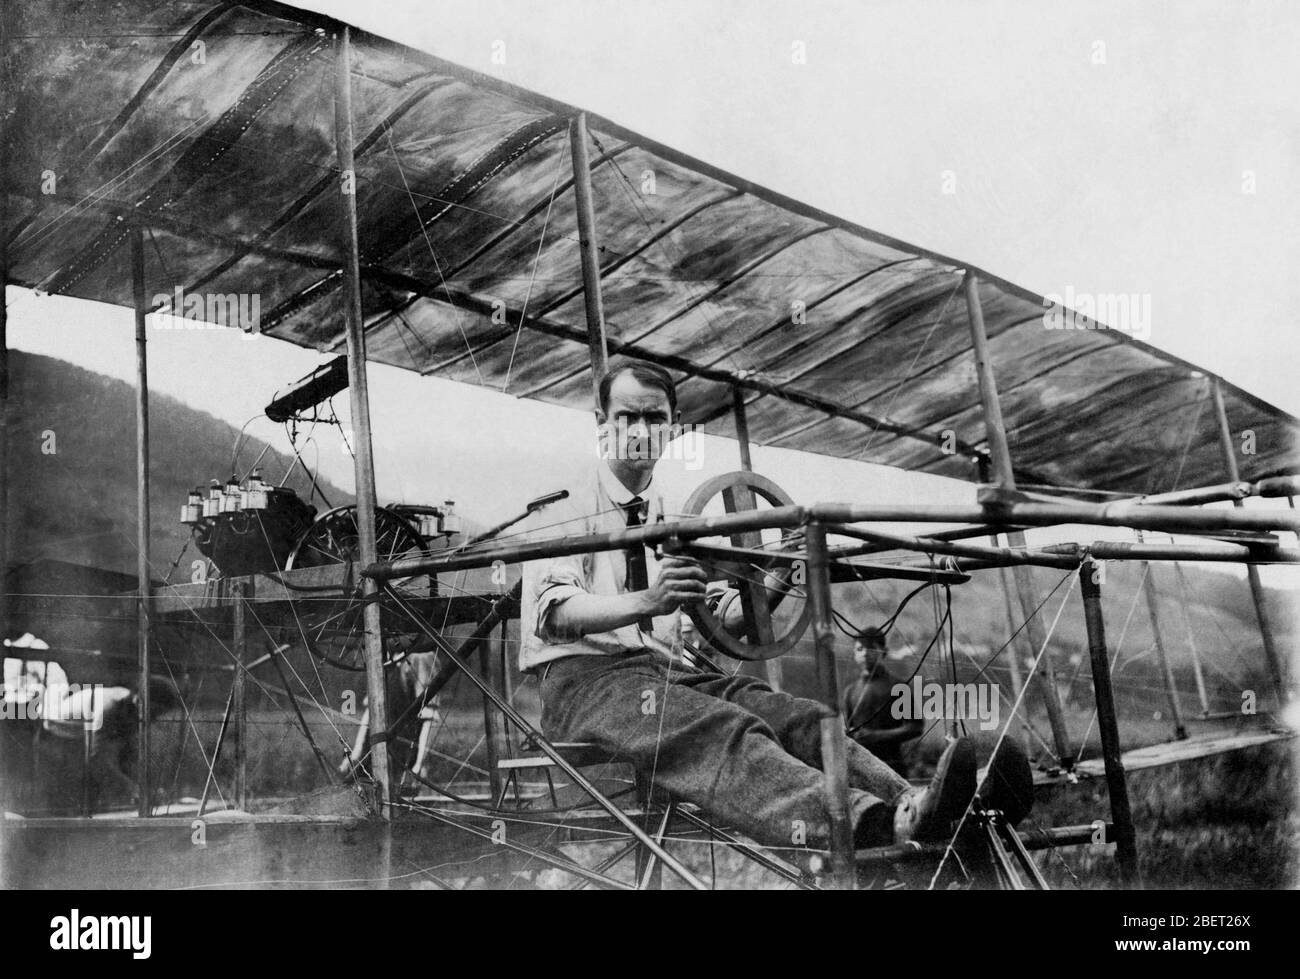 Glenn Curtiss, founder of the U.S. aircraft industry, sitting in his biplane. Stock Photo